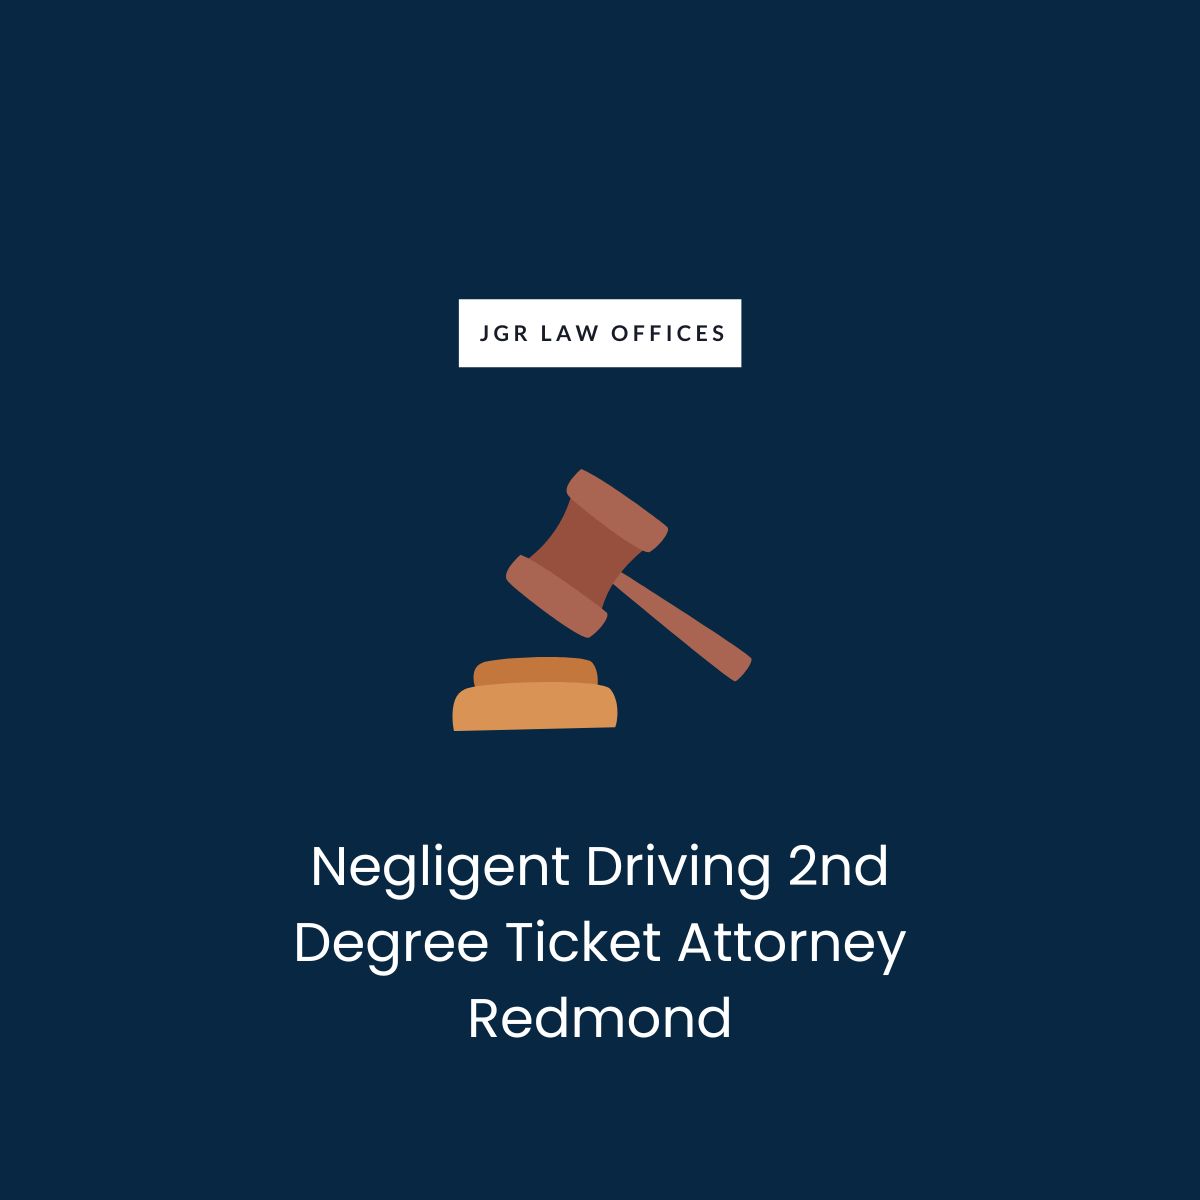 Negligent Driving 2nd Degree Ticket Lawyer Redmond Negligent Driving 2nd Degree